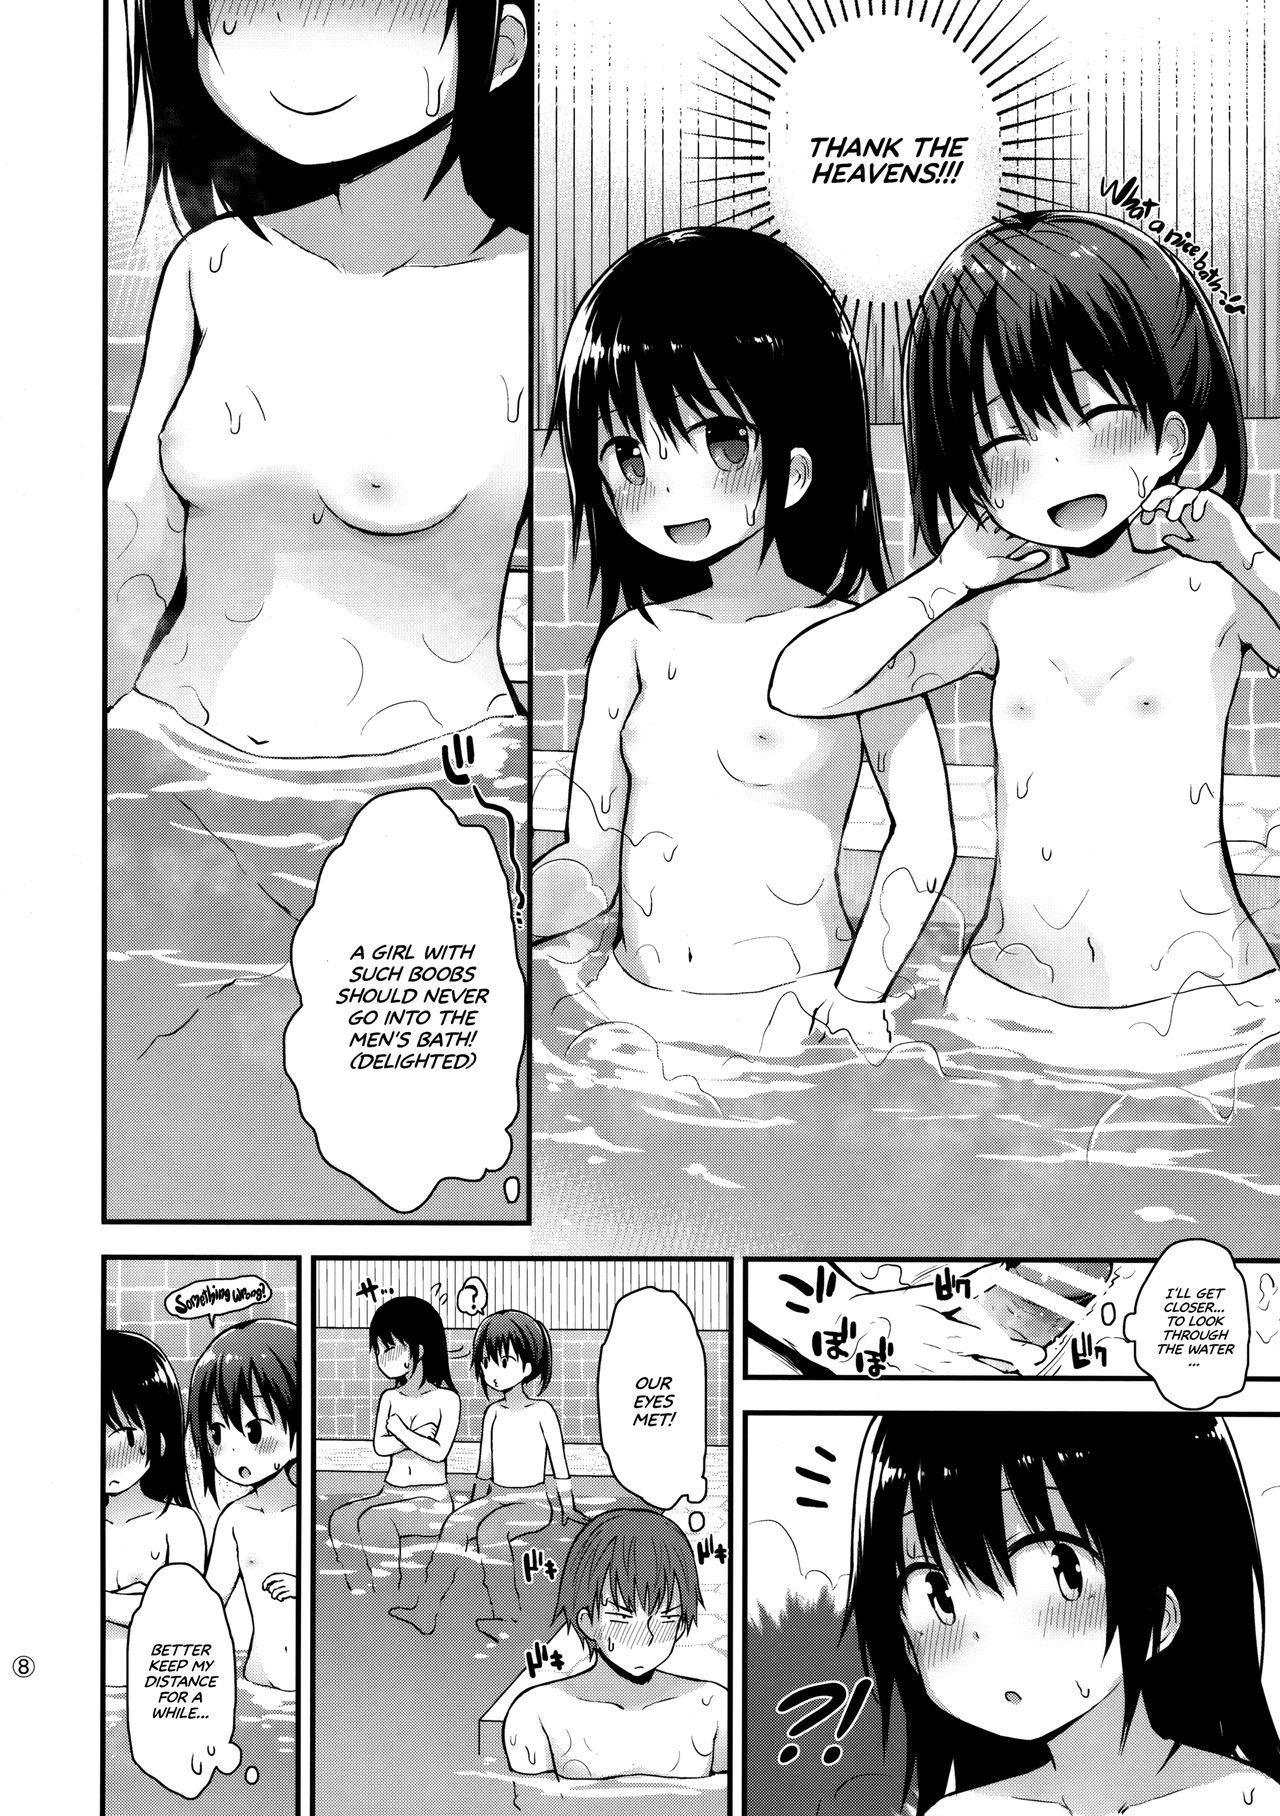 Clitoris Onnanoko datte Otokoyu ni Hairitai | They may just be little girls, but they still want to enter the men's bath! - Original Pissing - Page 7